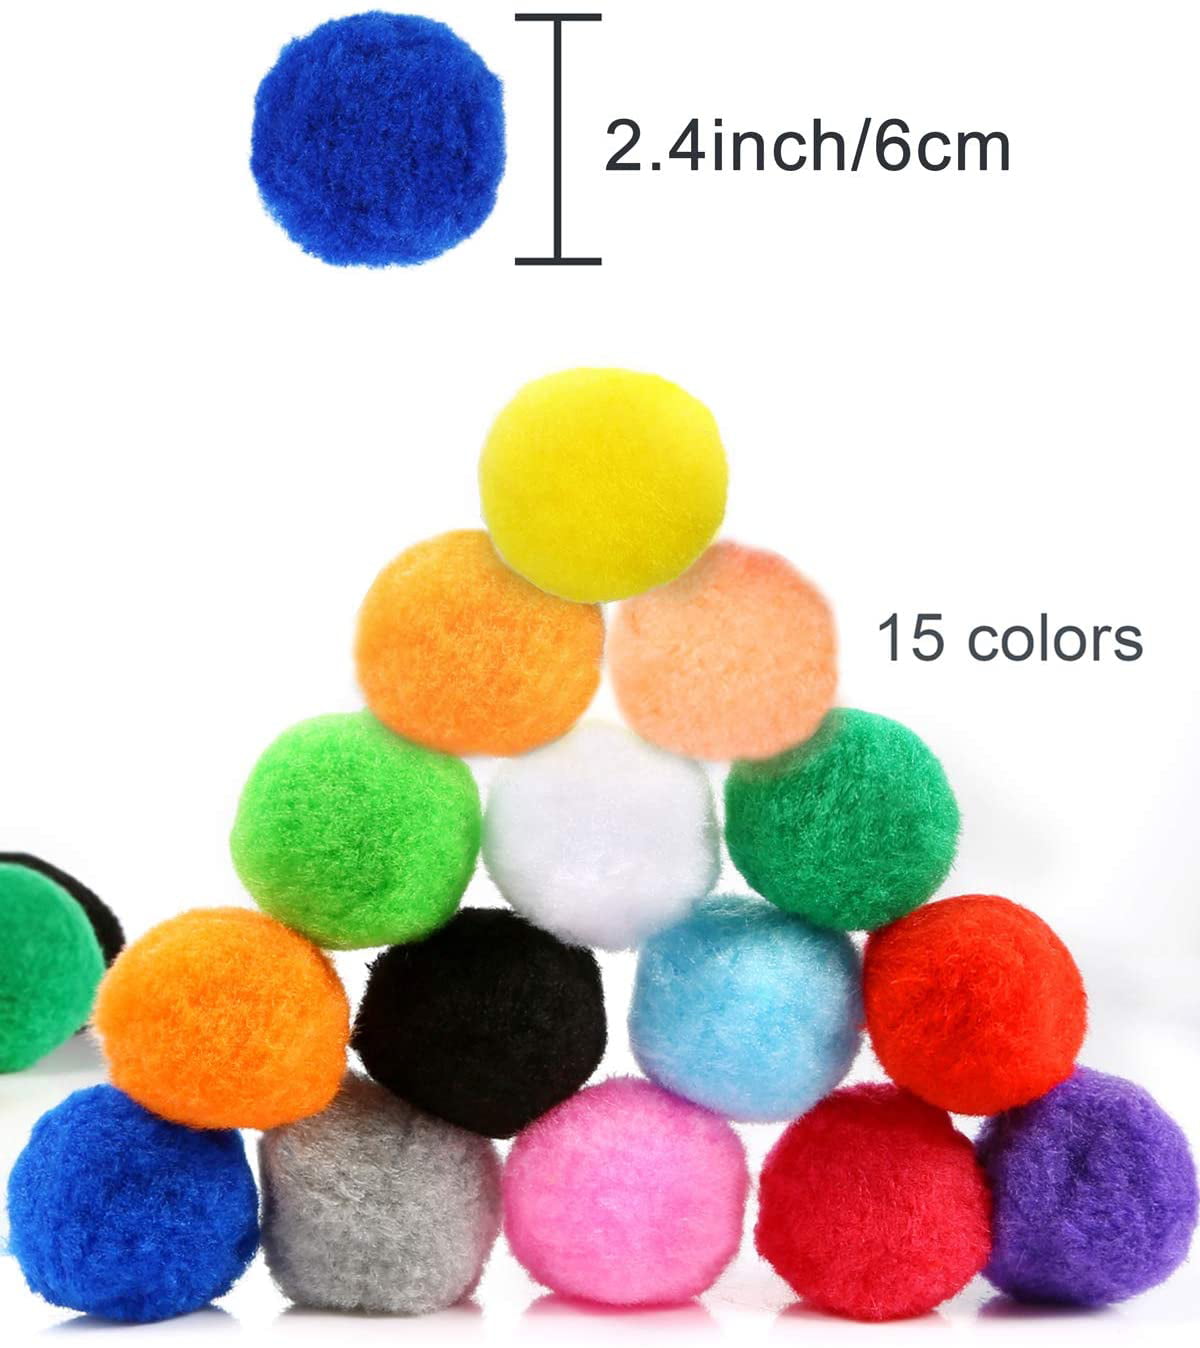 Shappy 2000 Pieces 6 mm Pom Poms for Craft Making, Hobby Supplies and DIY Creative Crafts Decorations (Multicolored)